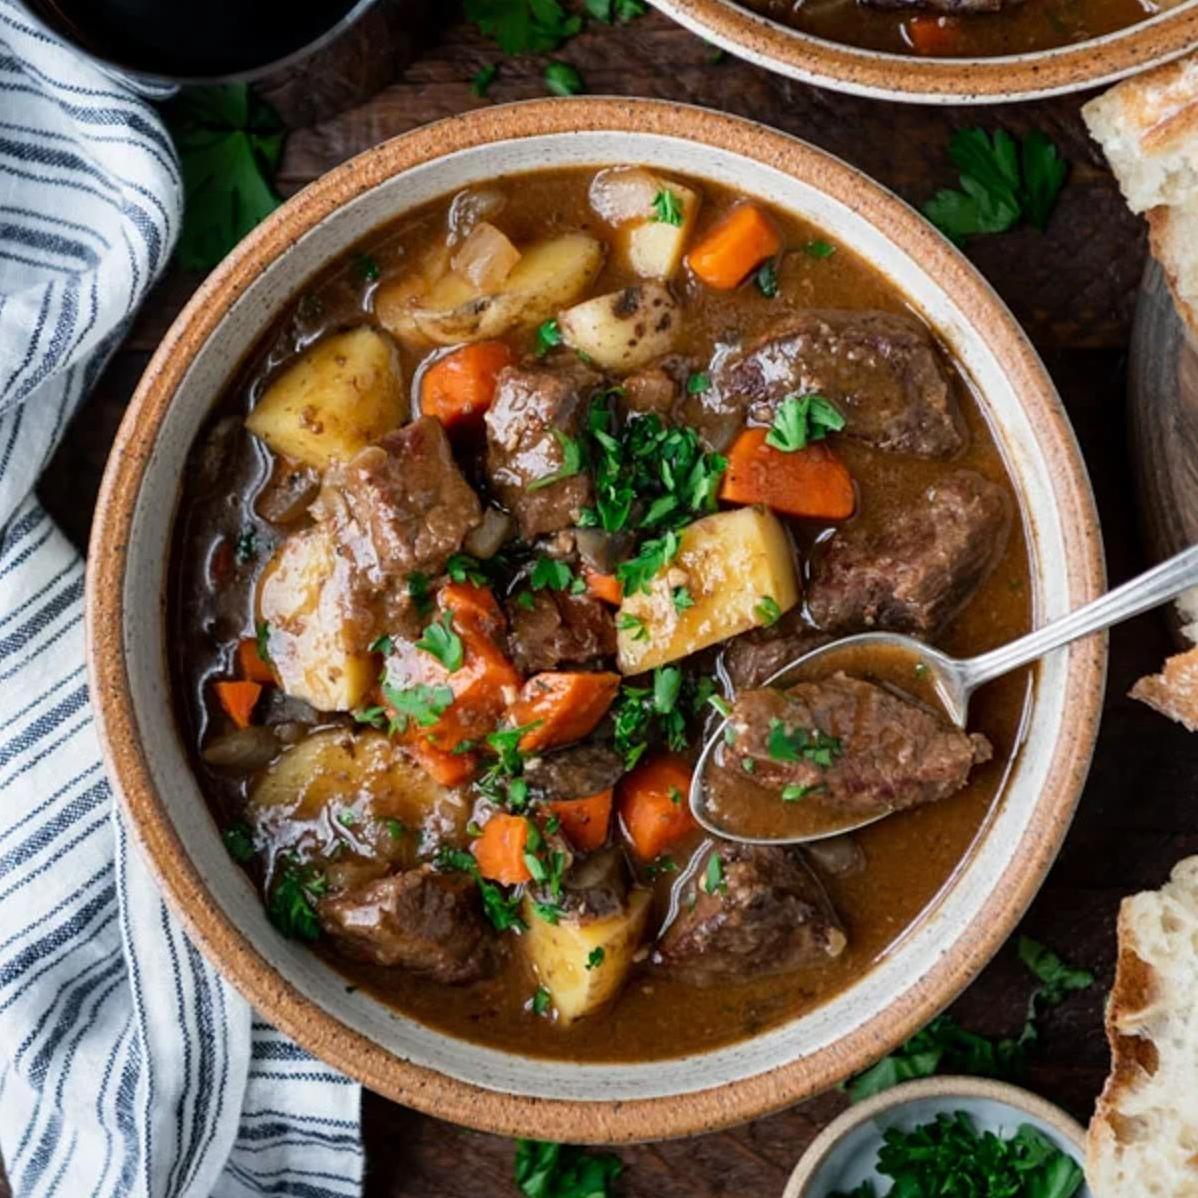  Your taste buds will love the combination of tender meat and vegetables in this stew.